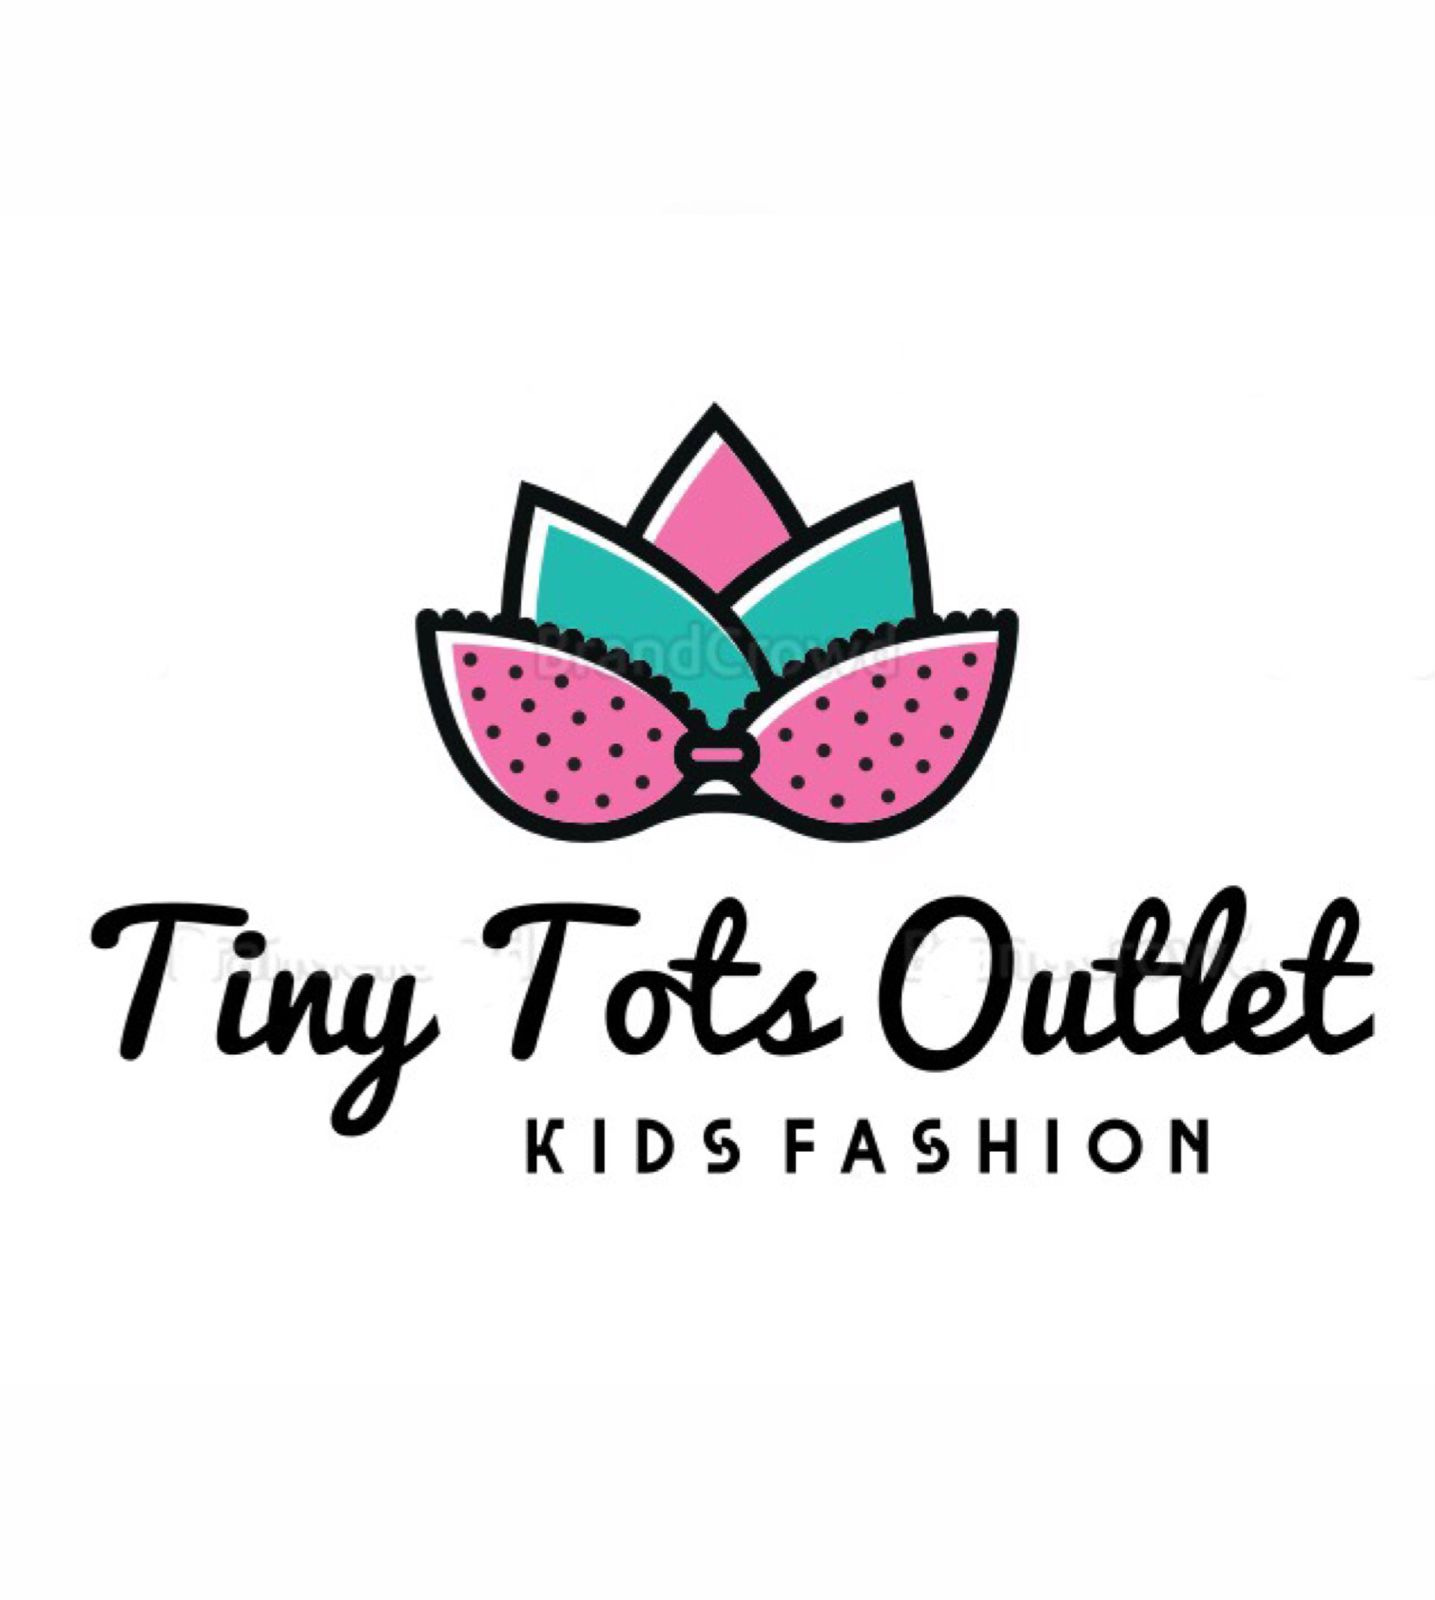 Tiny tots outlet